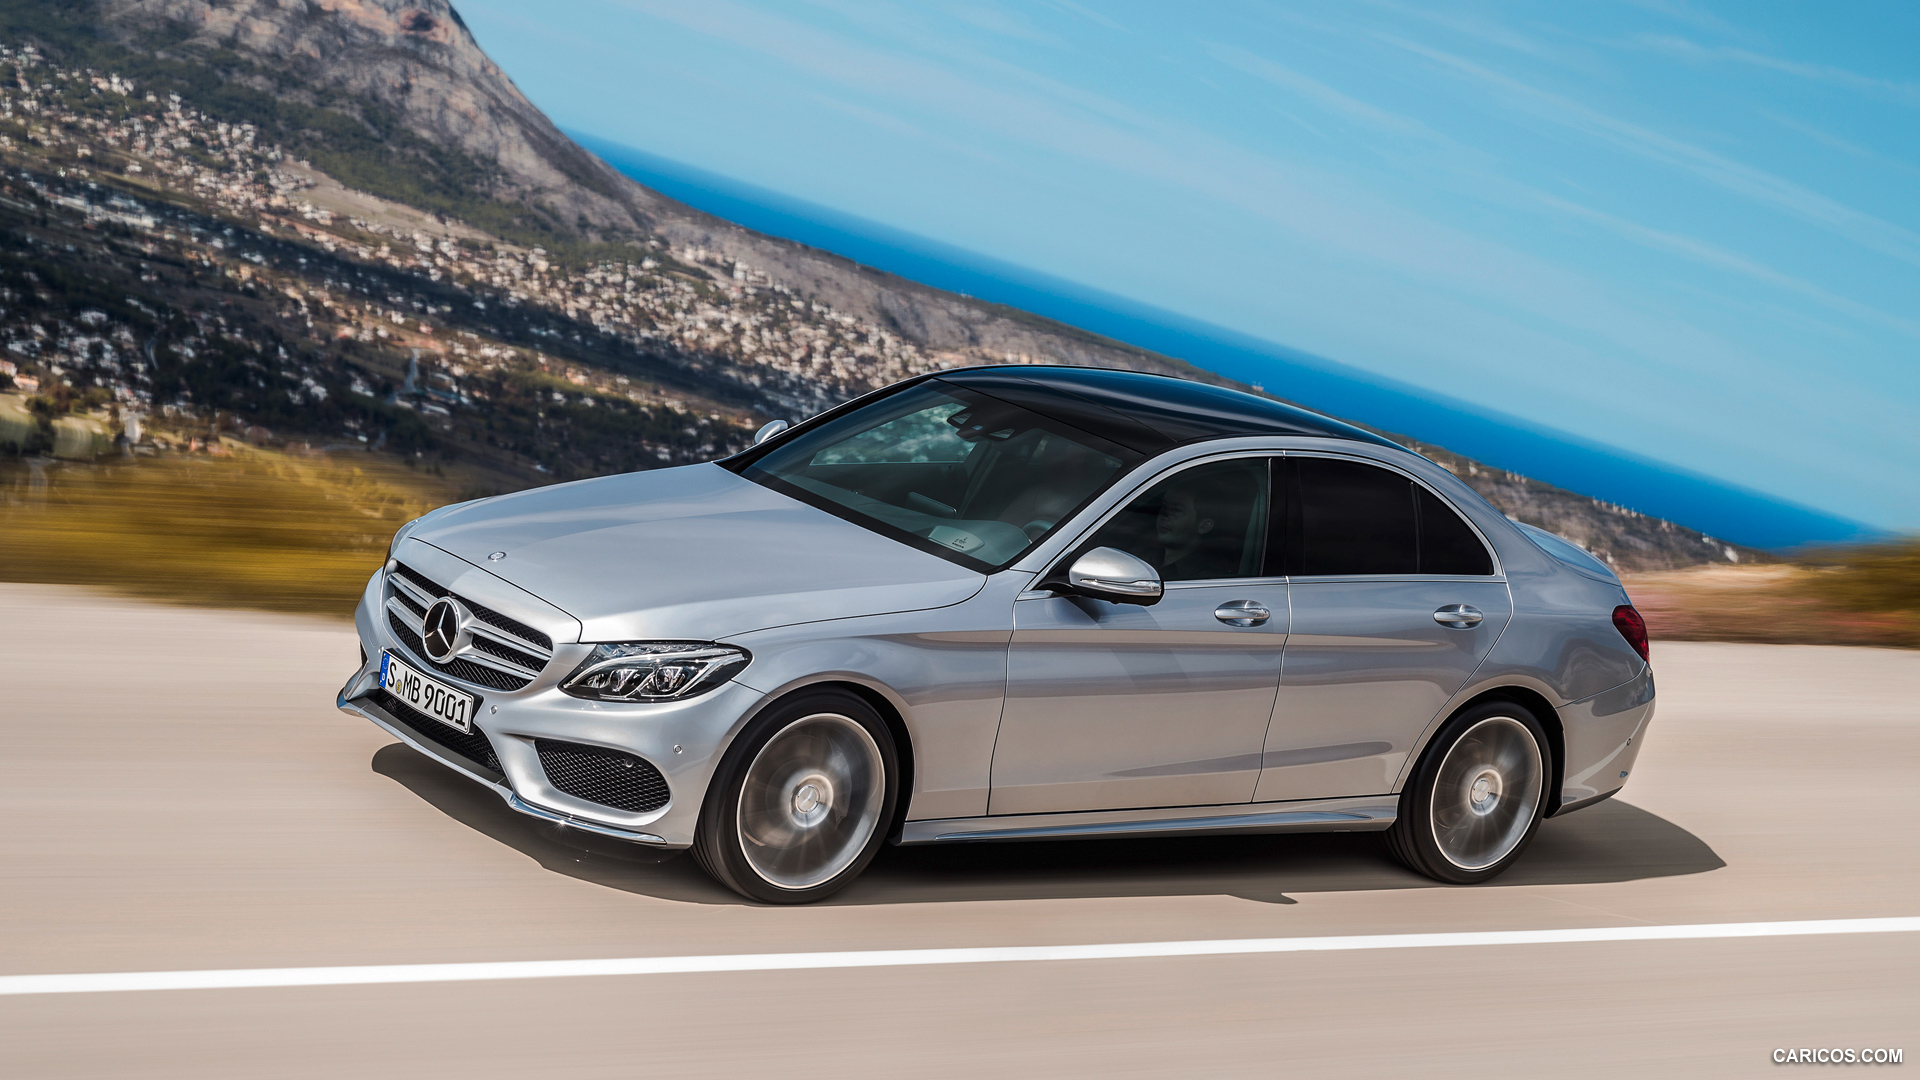 2015 Mercedes-Benz C-Class C250 (AMG Line) - Side, #166 of 181